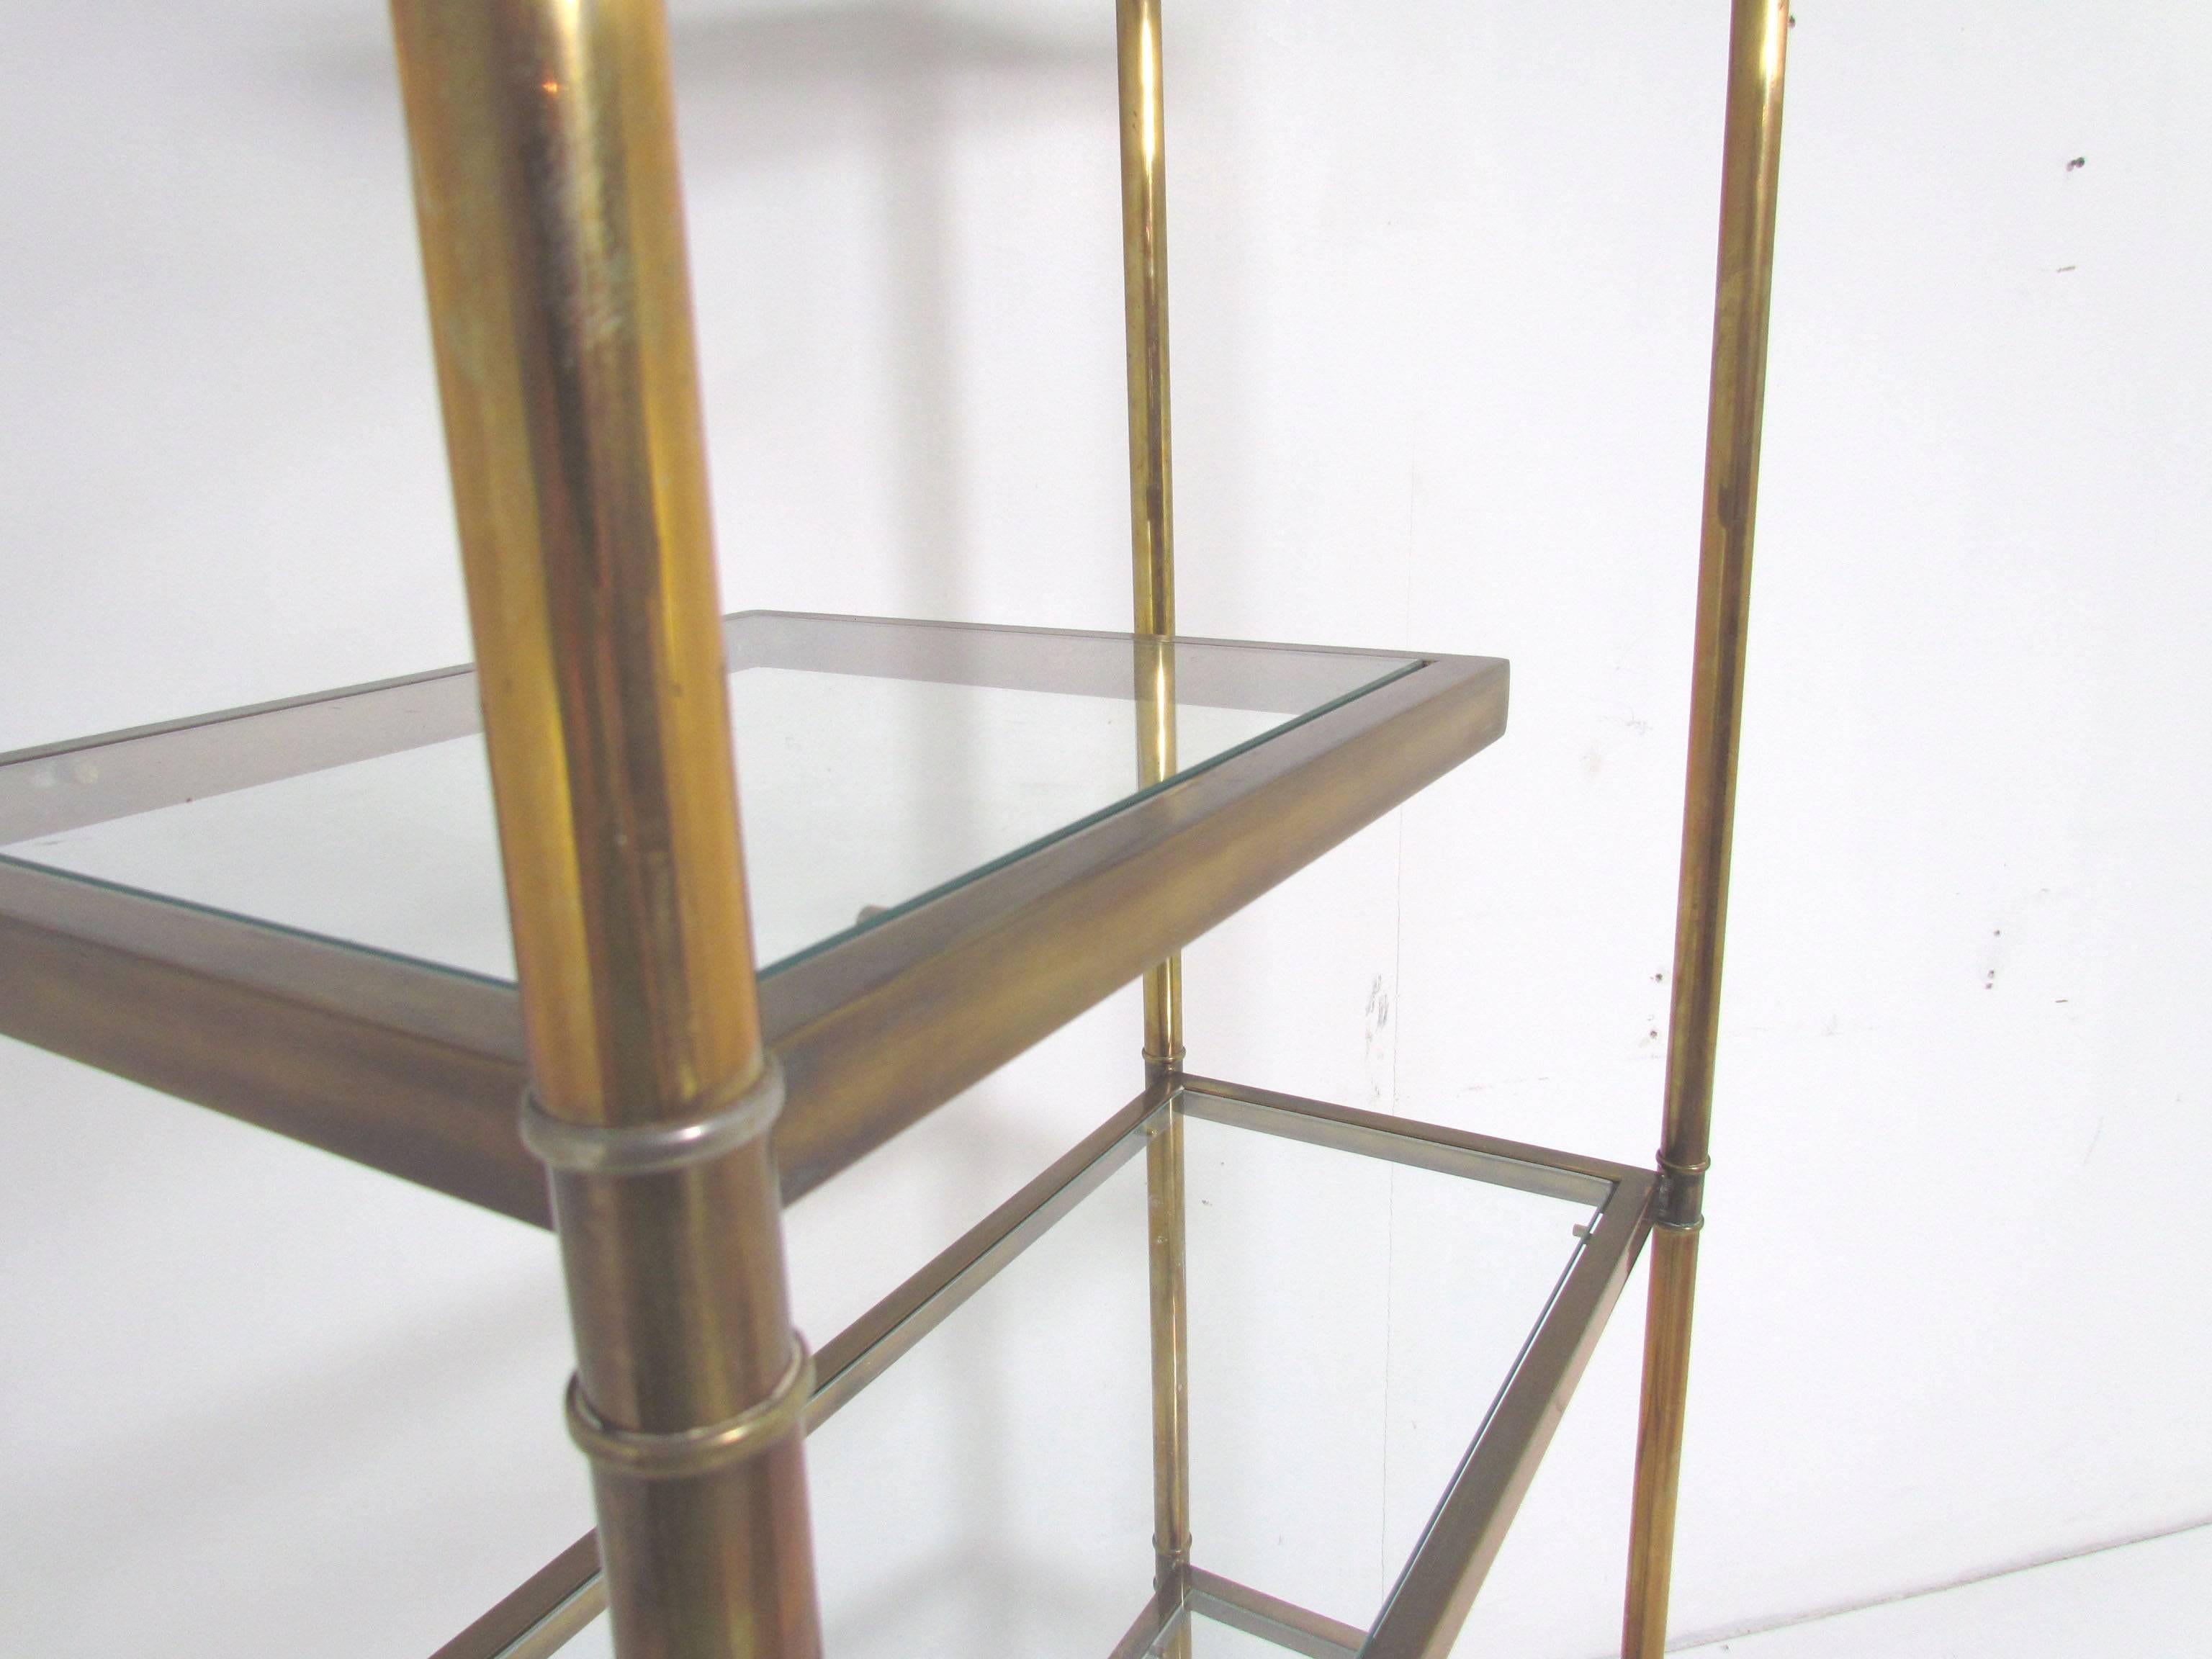 Mid-20th Century Hollywood Regency Étagère in Brass with Cantilevered Display Shelves